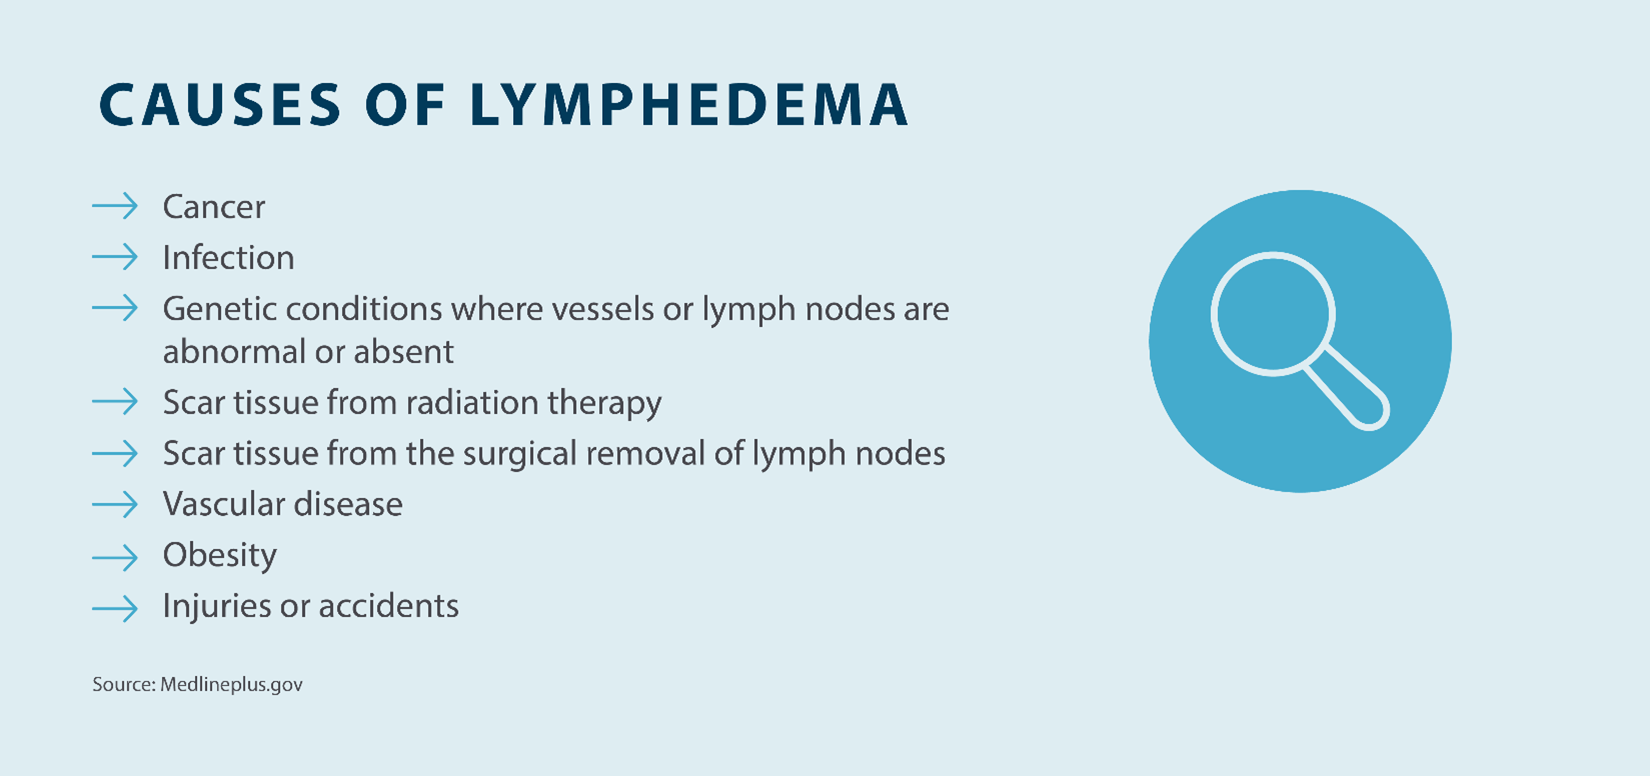 image with some of the causes of lymphedema, like cancer, infection, vascular disease and others